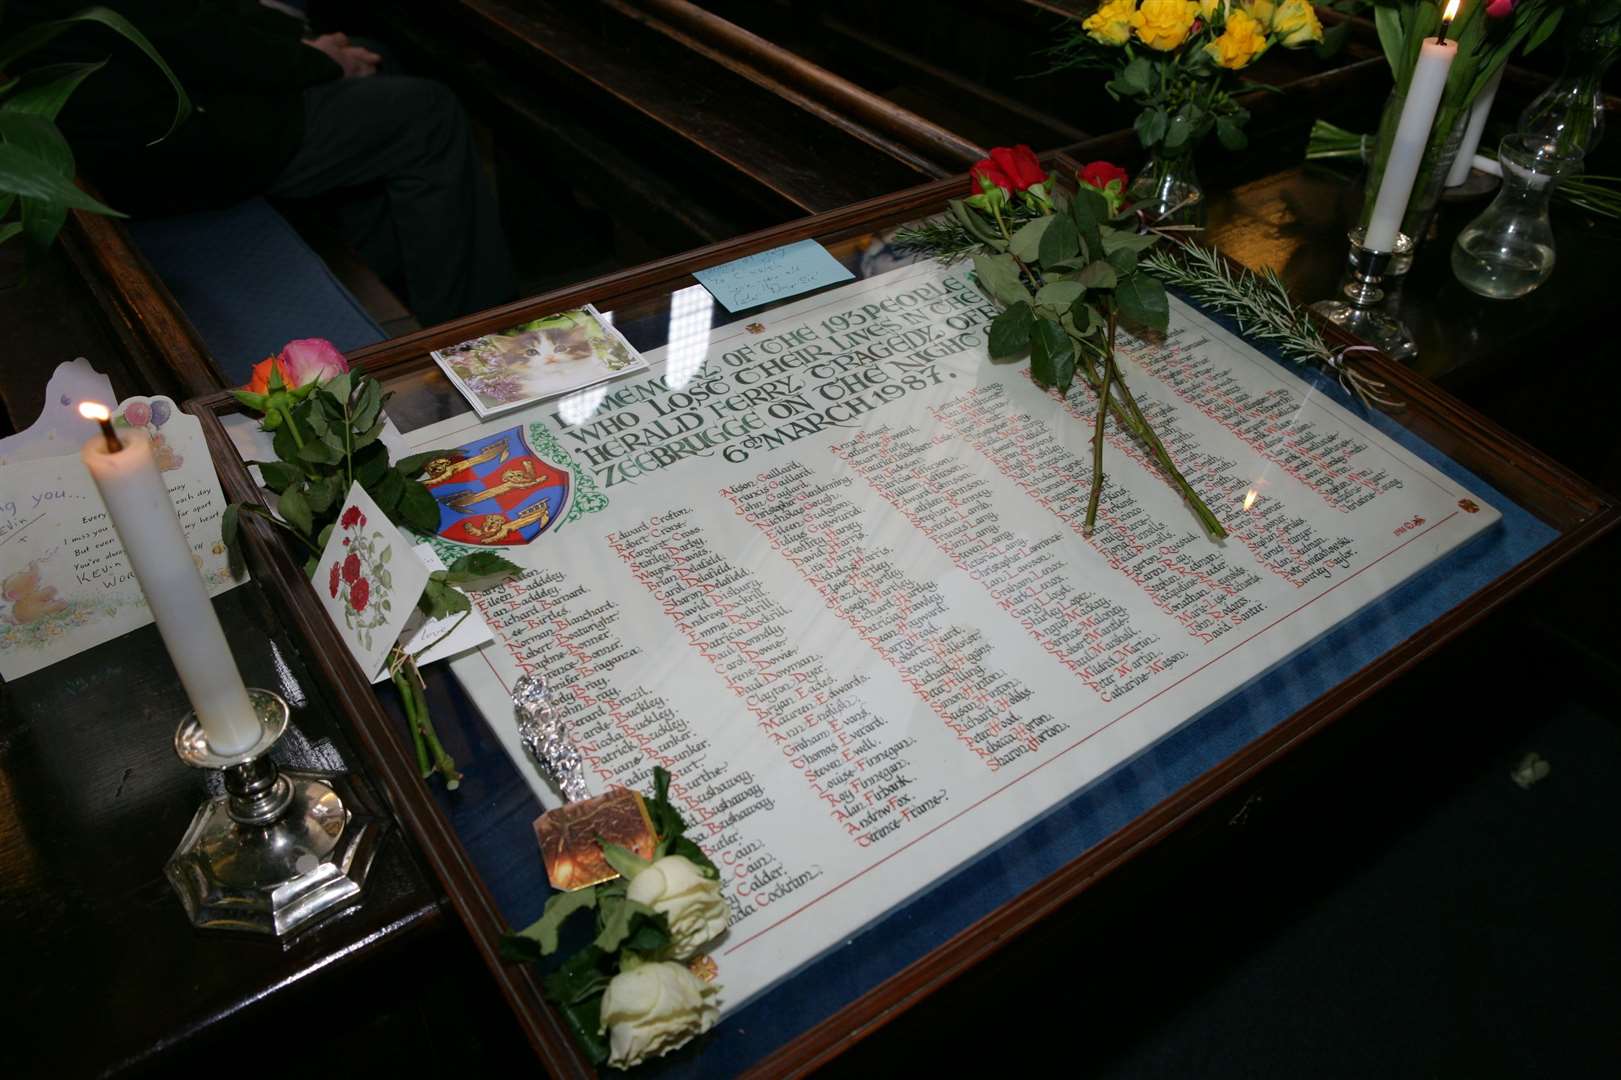 The list of 193 victims at St Mary's Church, Dover, during the 25th anniversary memorial. Picture: Martin Apps